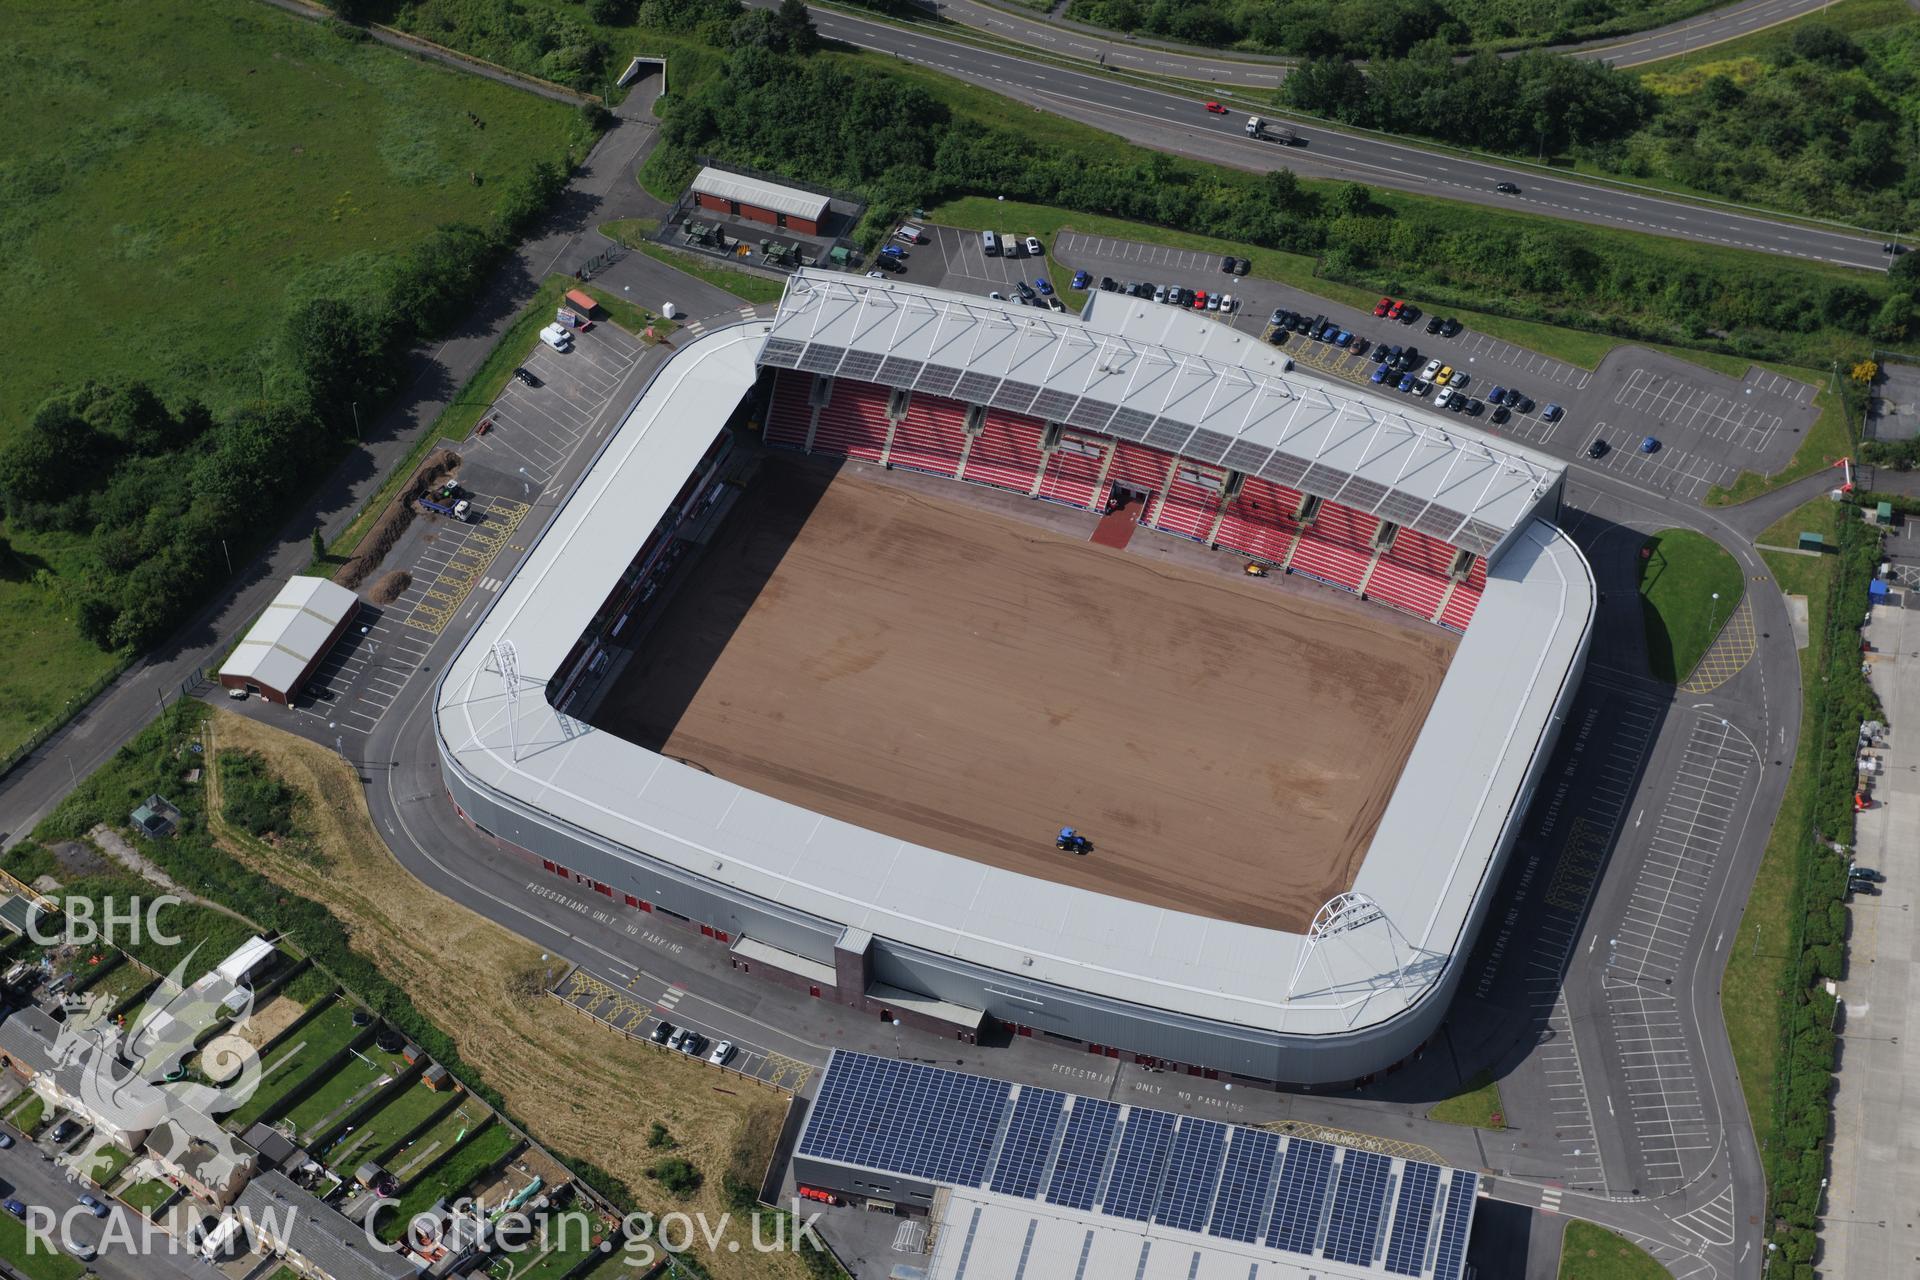 Parc-y-Scarlets Stadium, Llanelli. Oblique aerial photograph taken during the Royal Commission's programme of archaeological aerial reconnaissance by Toby Driver on 19th June 2015.